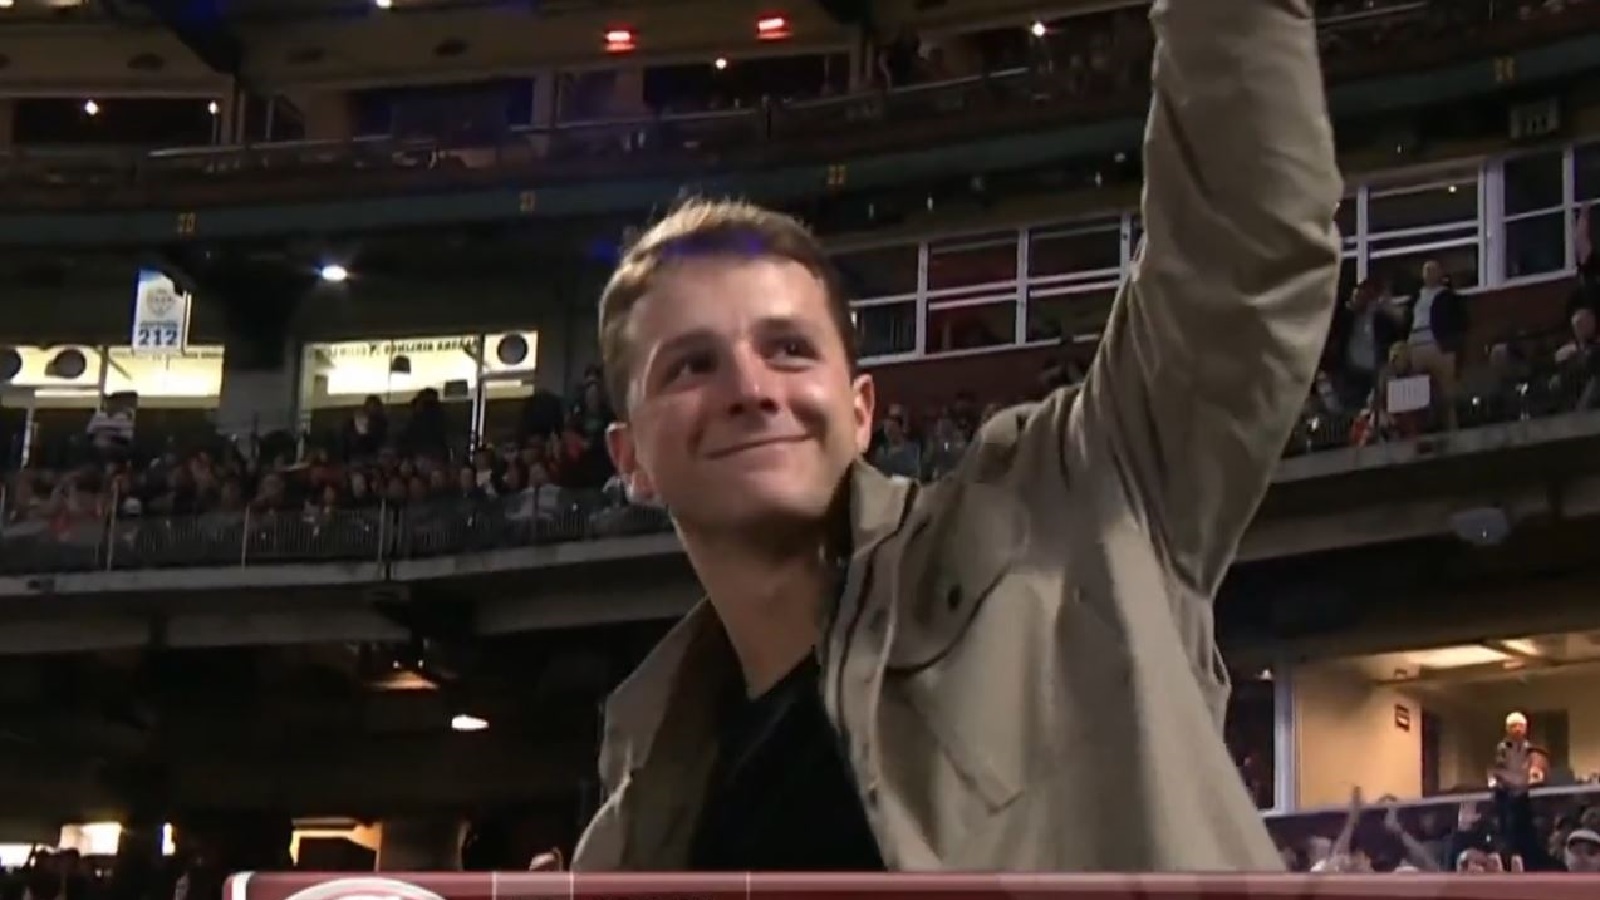 Video: Brock Purdy got massive ovation at SF Giants game